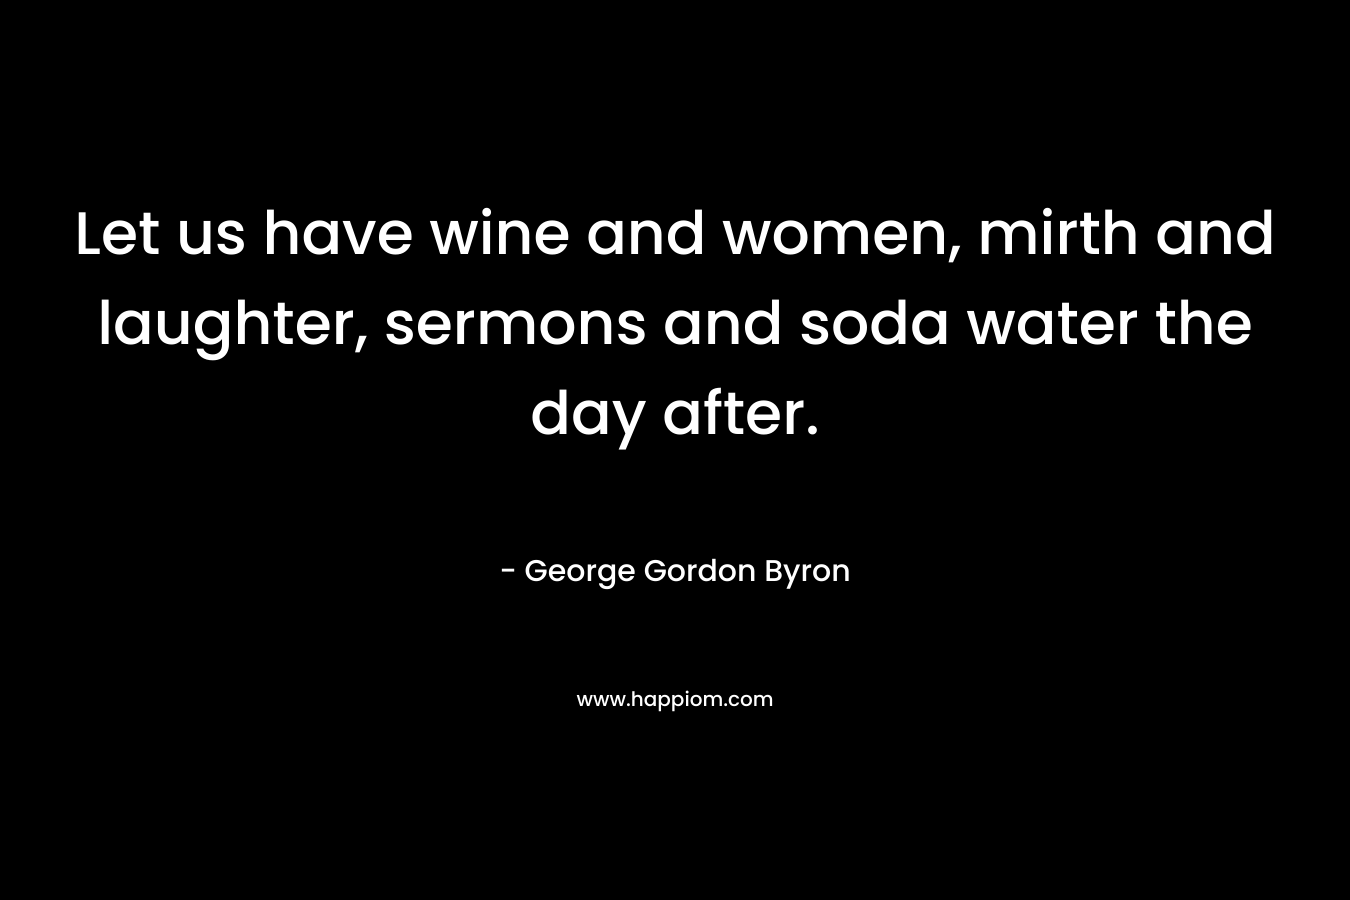 Let us have wine and women, mirth and laughter, sermons and soda water the day after. – George Gordon Byron